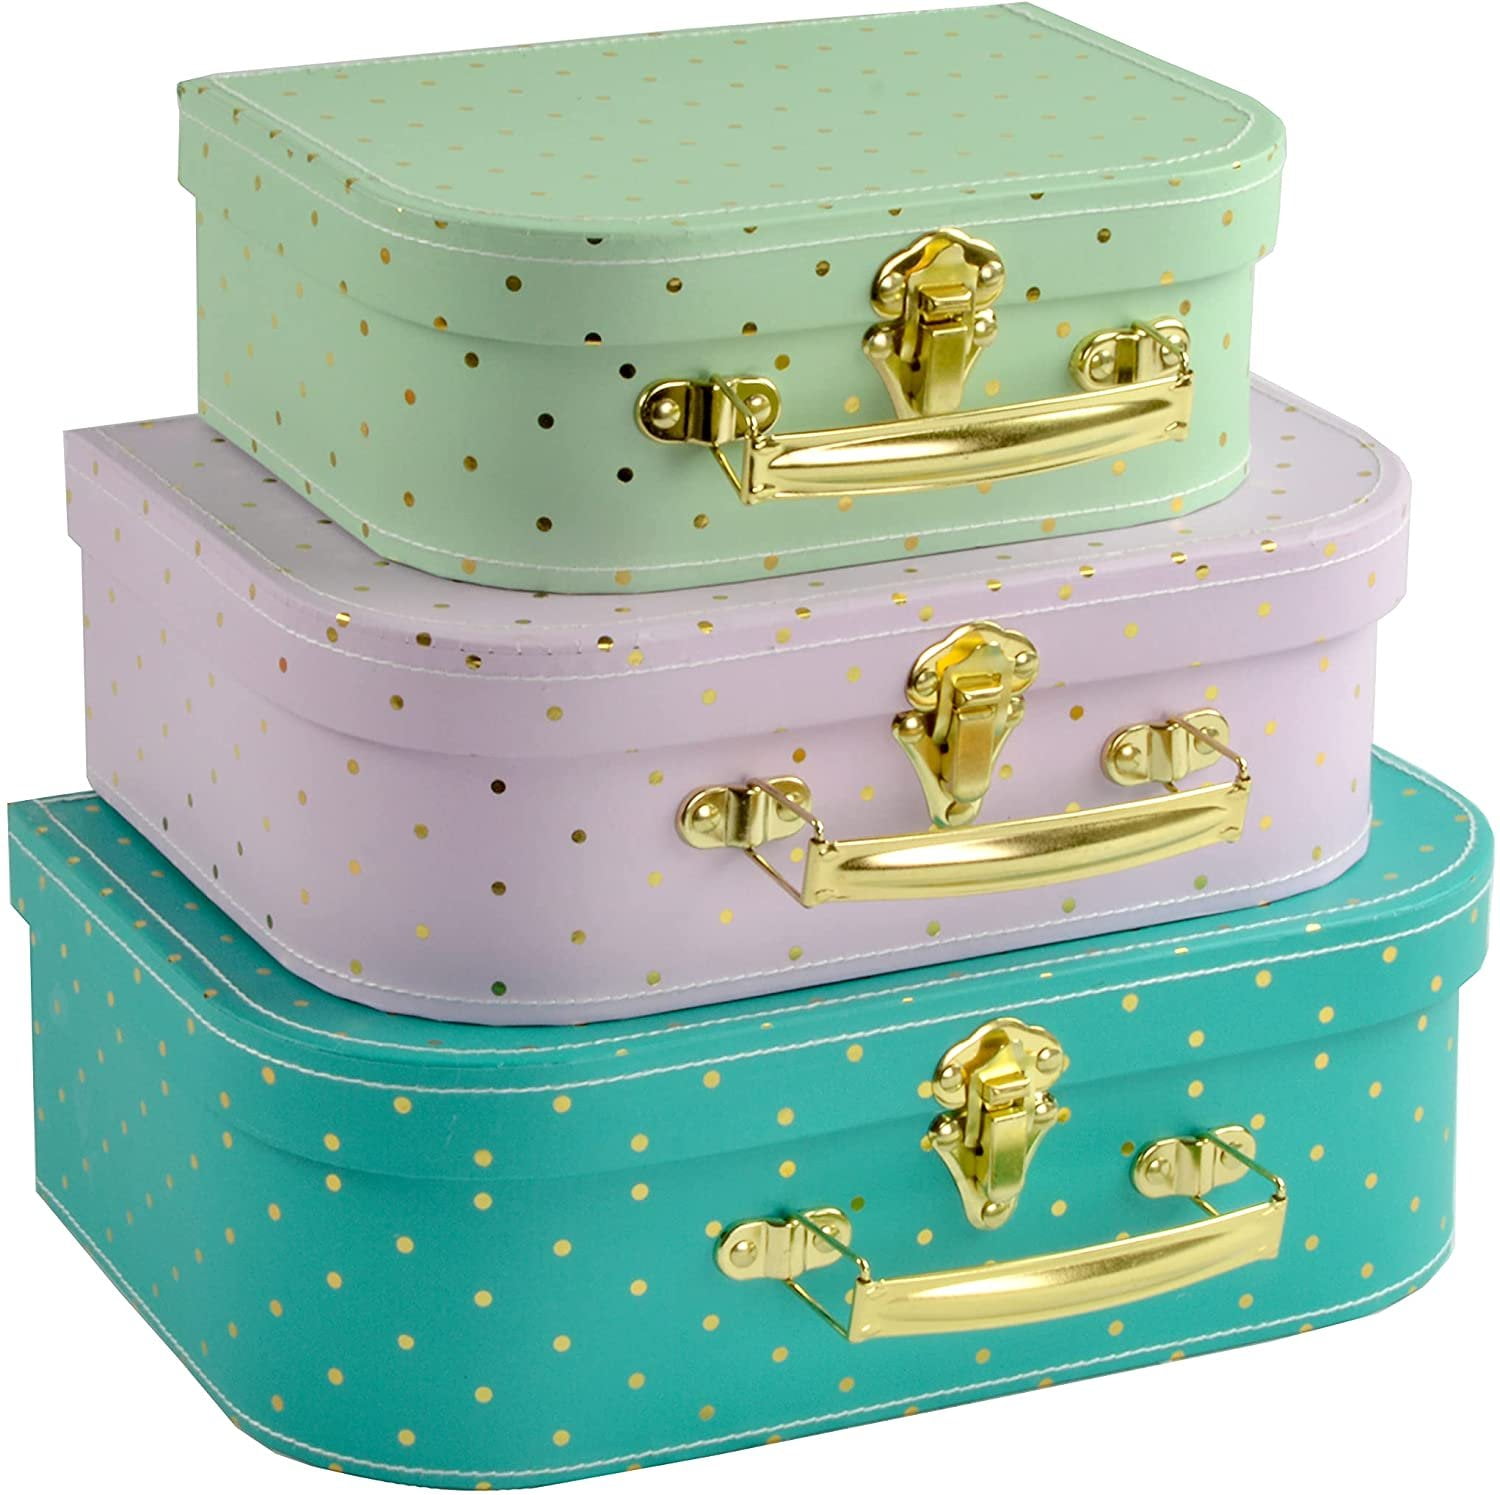 Home Office Decoration Barbie Storage Boxes Plum Designs Decorative Closet Mini Suitcases Party Favors & Christmas Gifts – Set of 3 Suitable for Toys and Photo Display Jewelry Organizer with Lids 